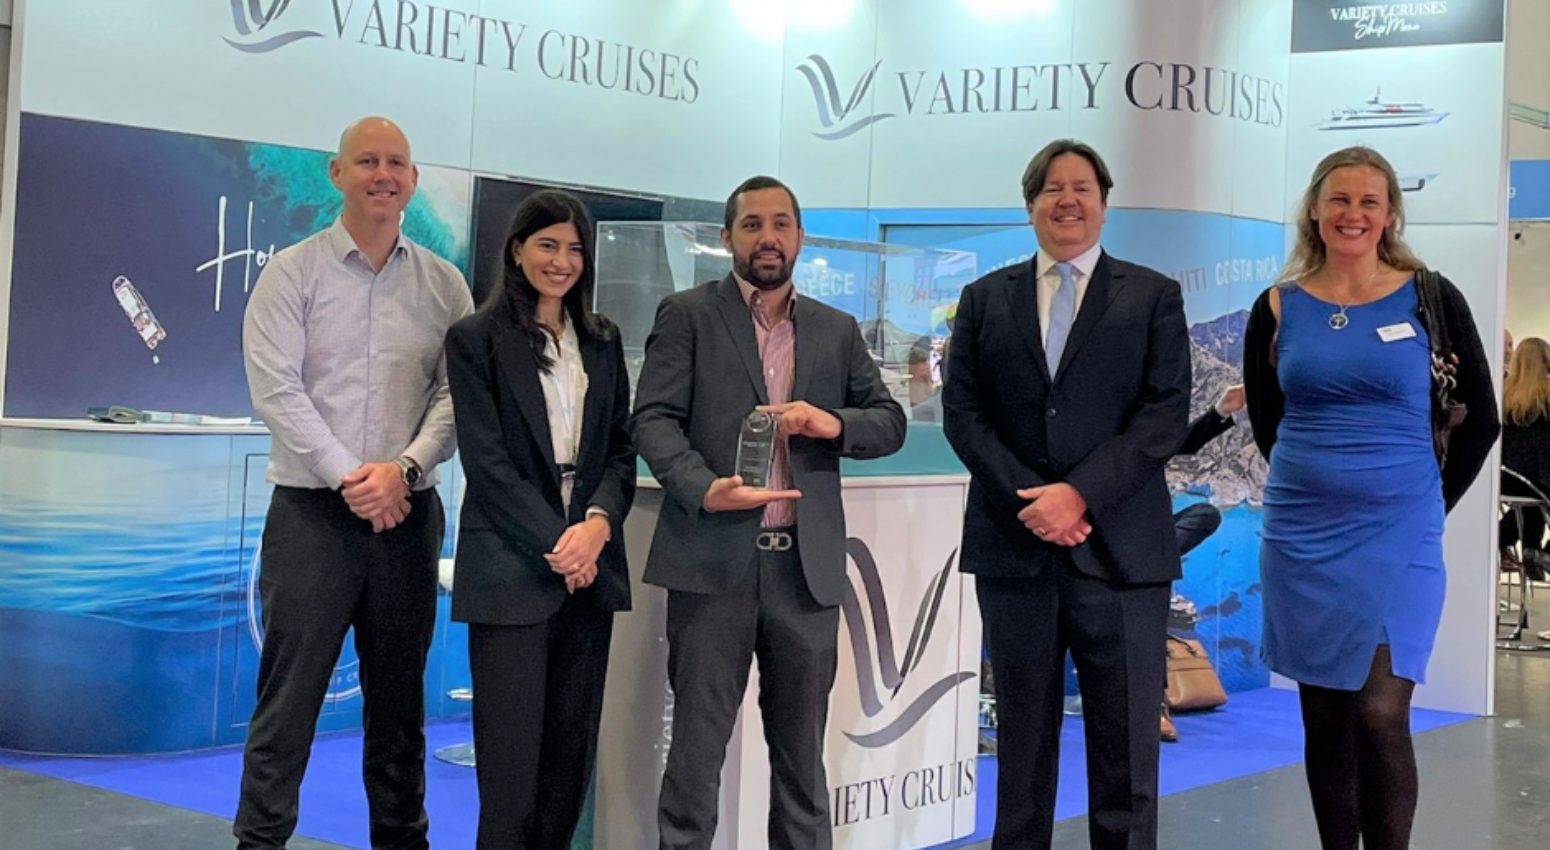 Variety Cruises' people with its awards